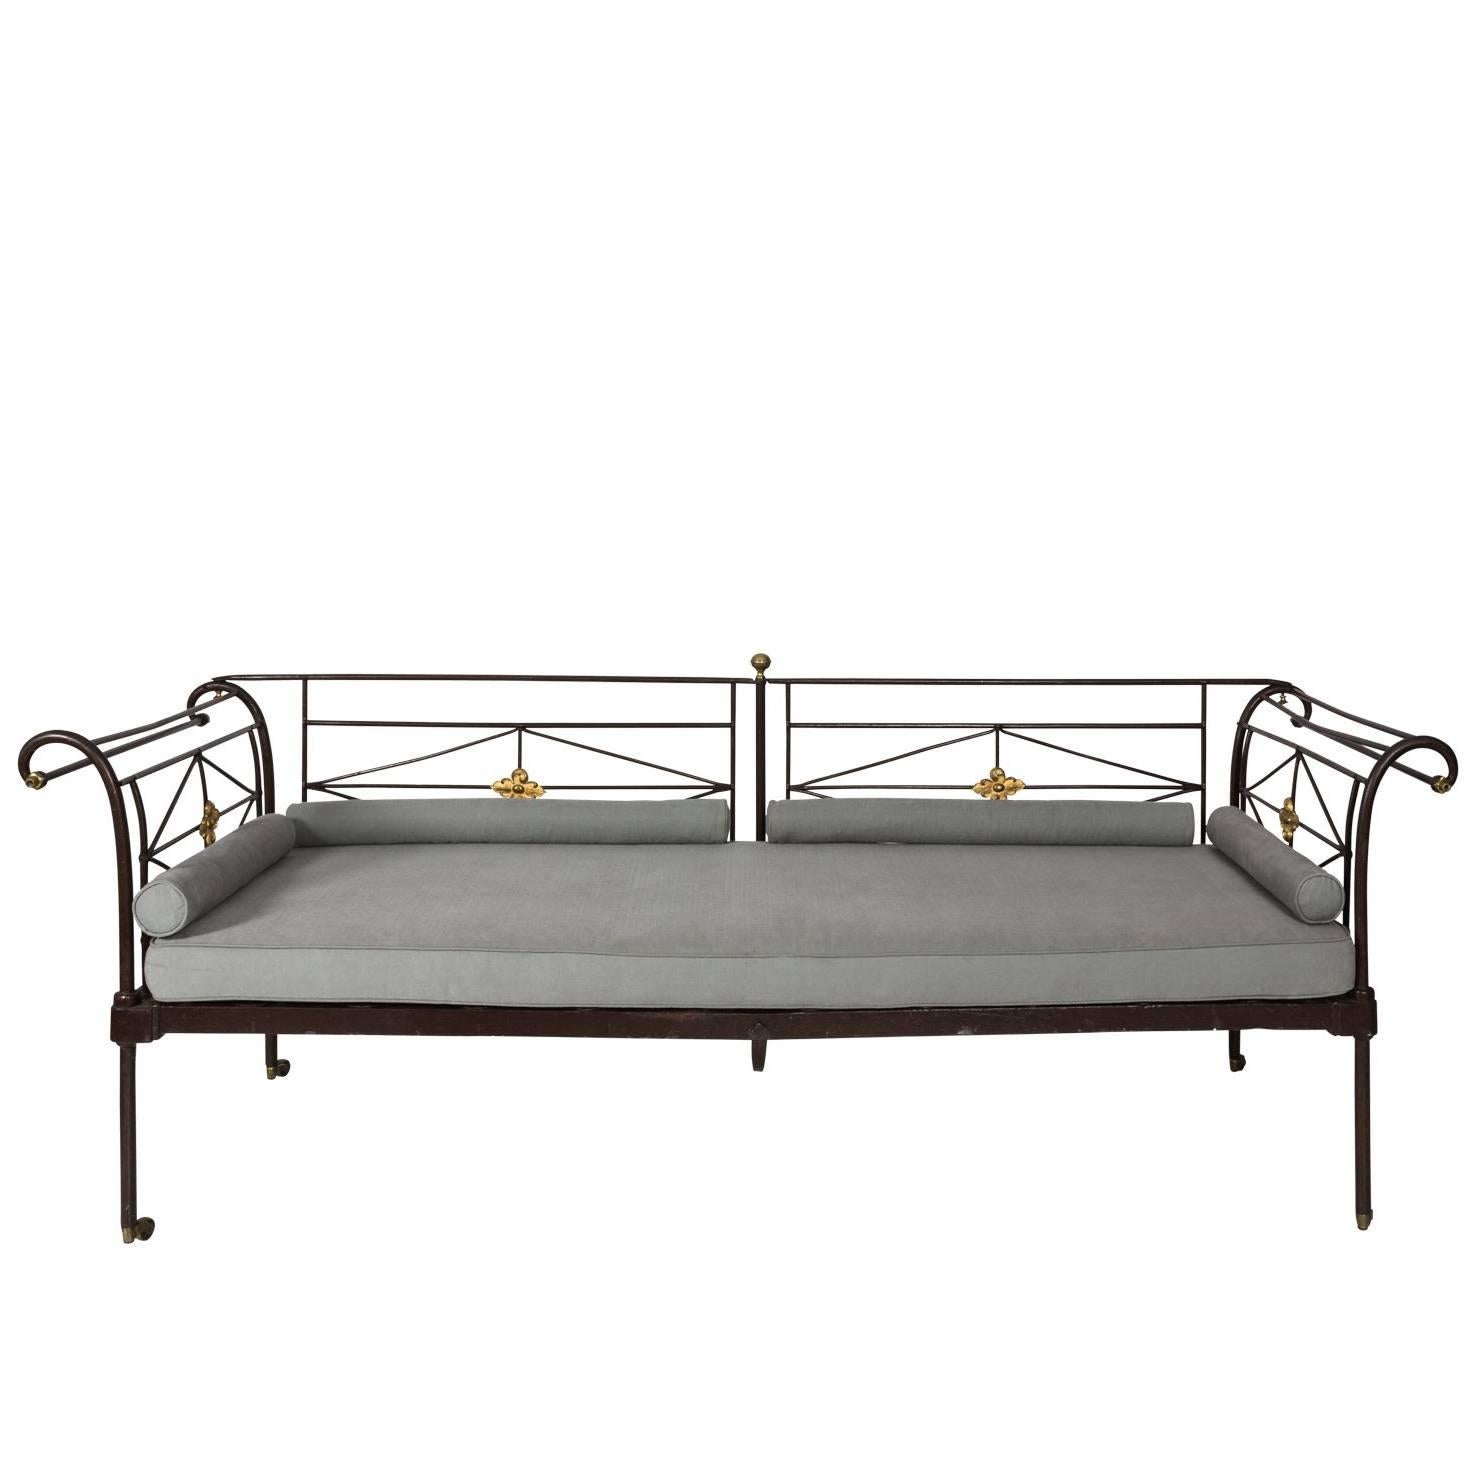 RW Winfield & Son Cast Iron Daybed, circa 1890s